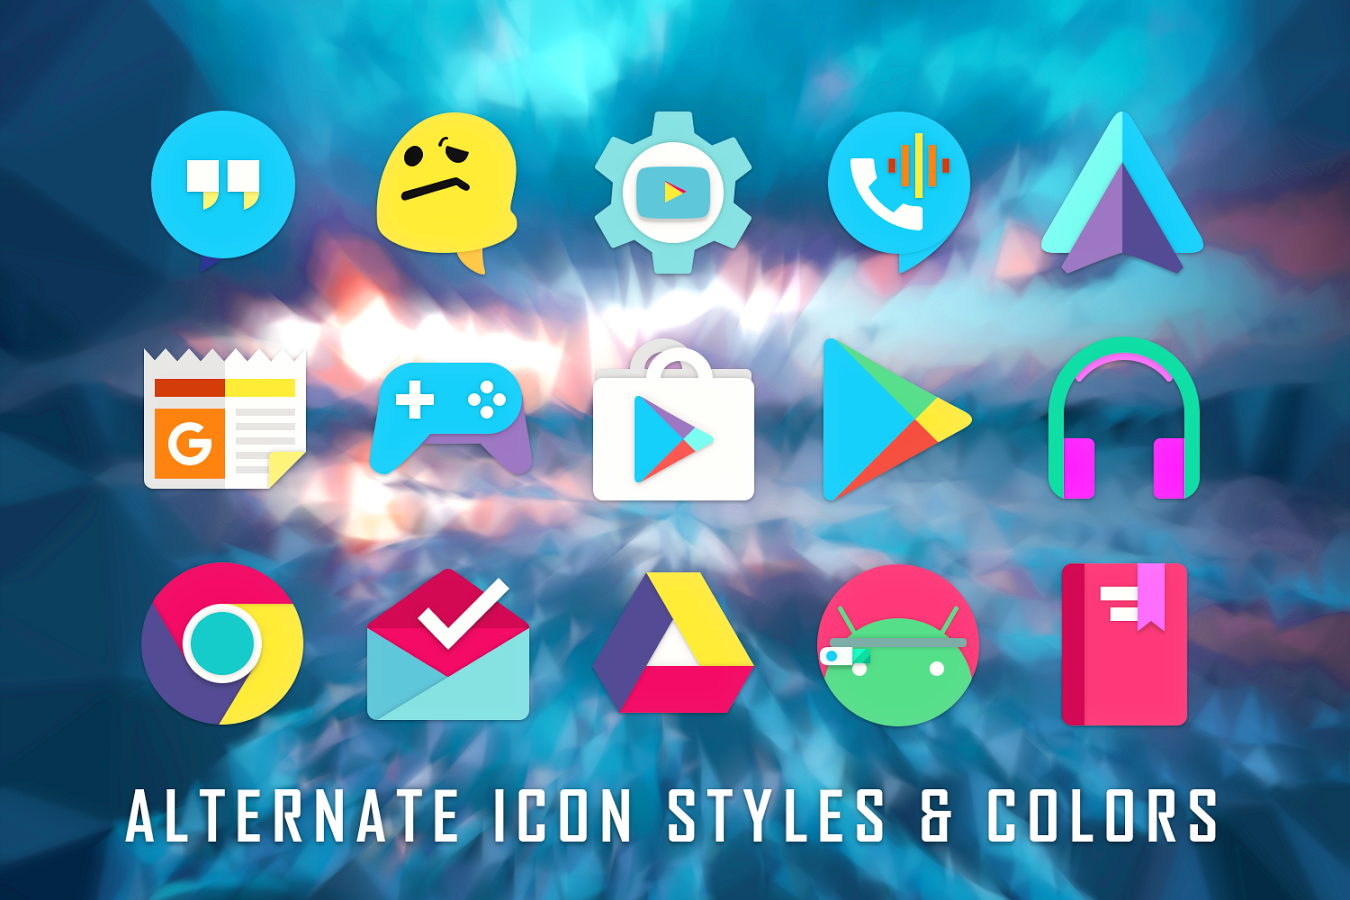 Ultra Icon Pack BETA